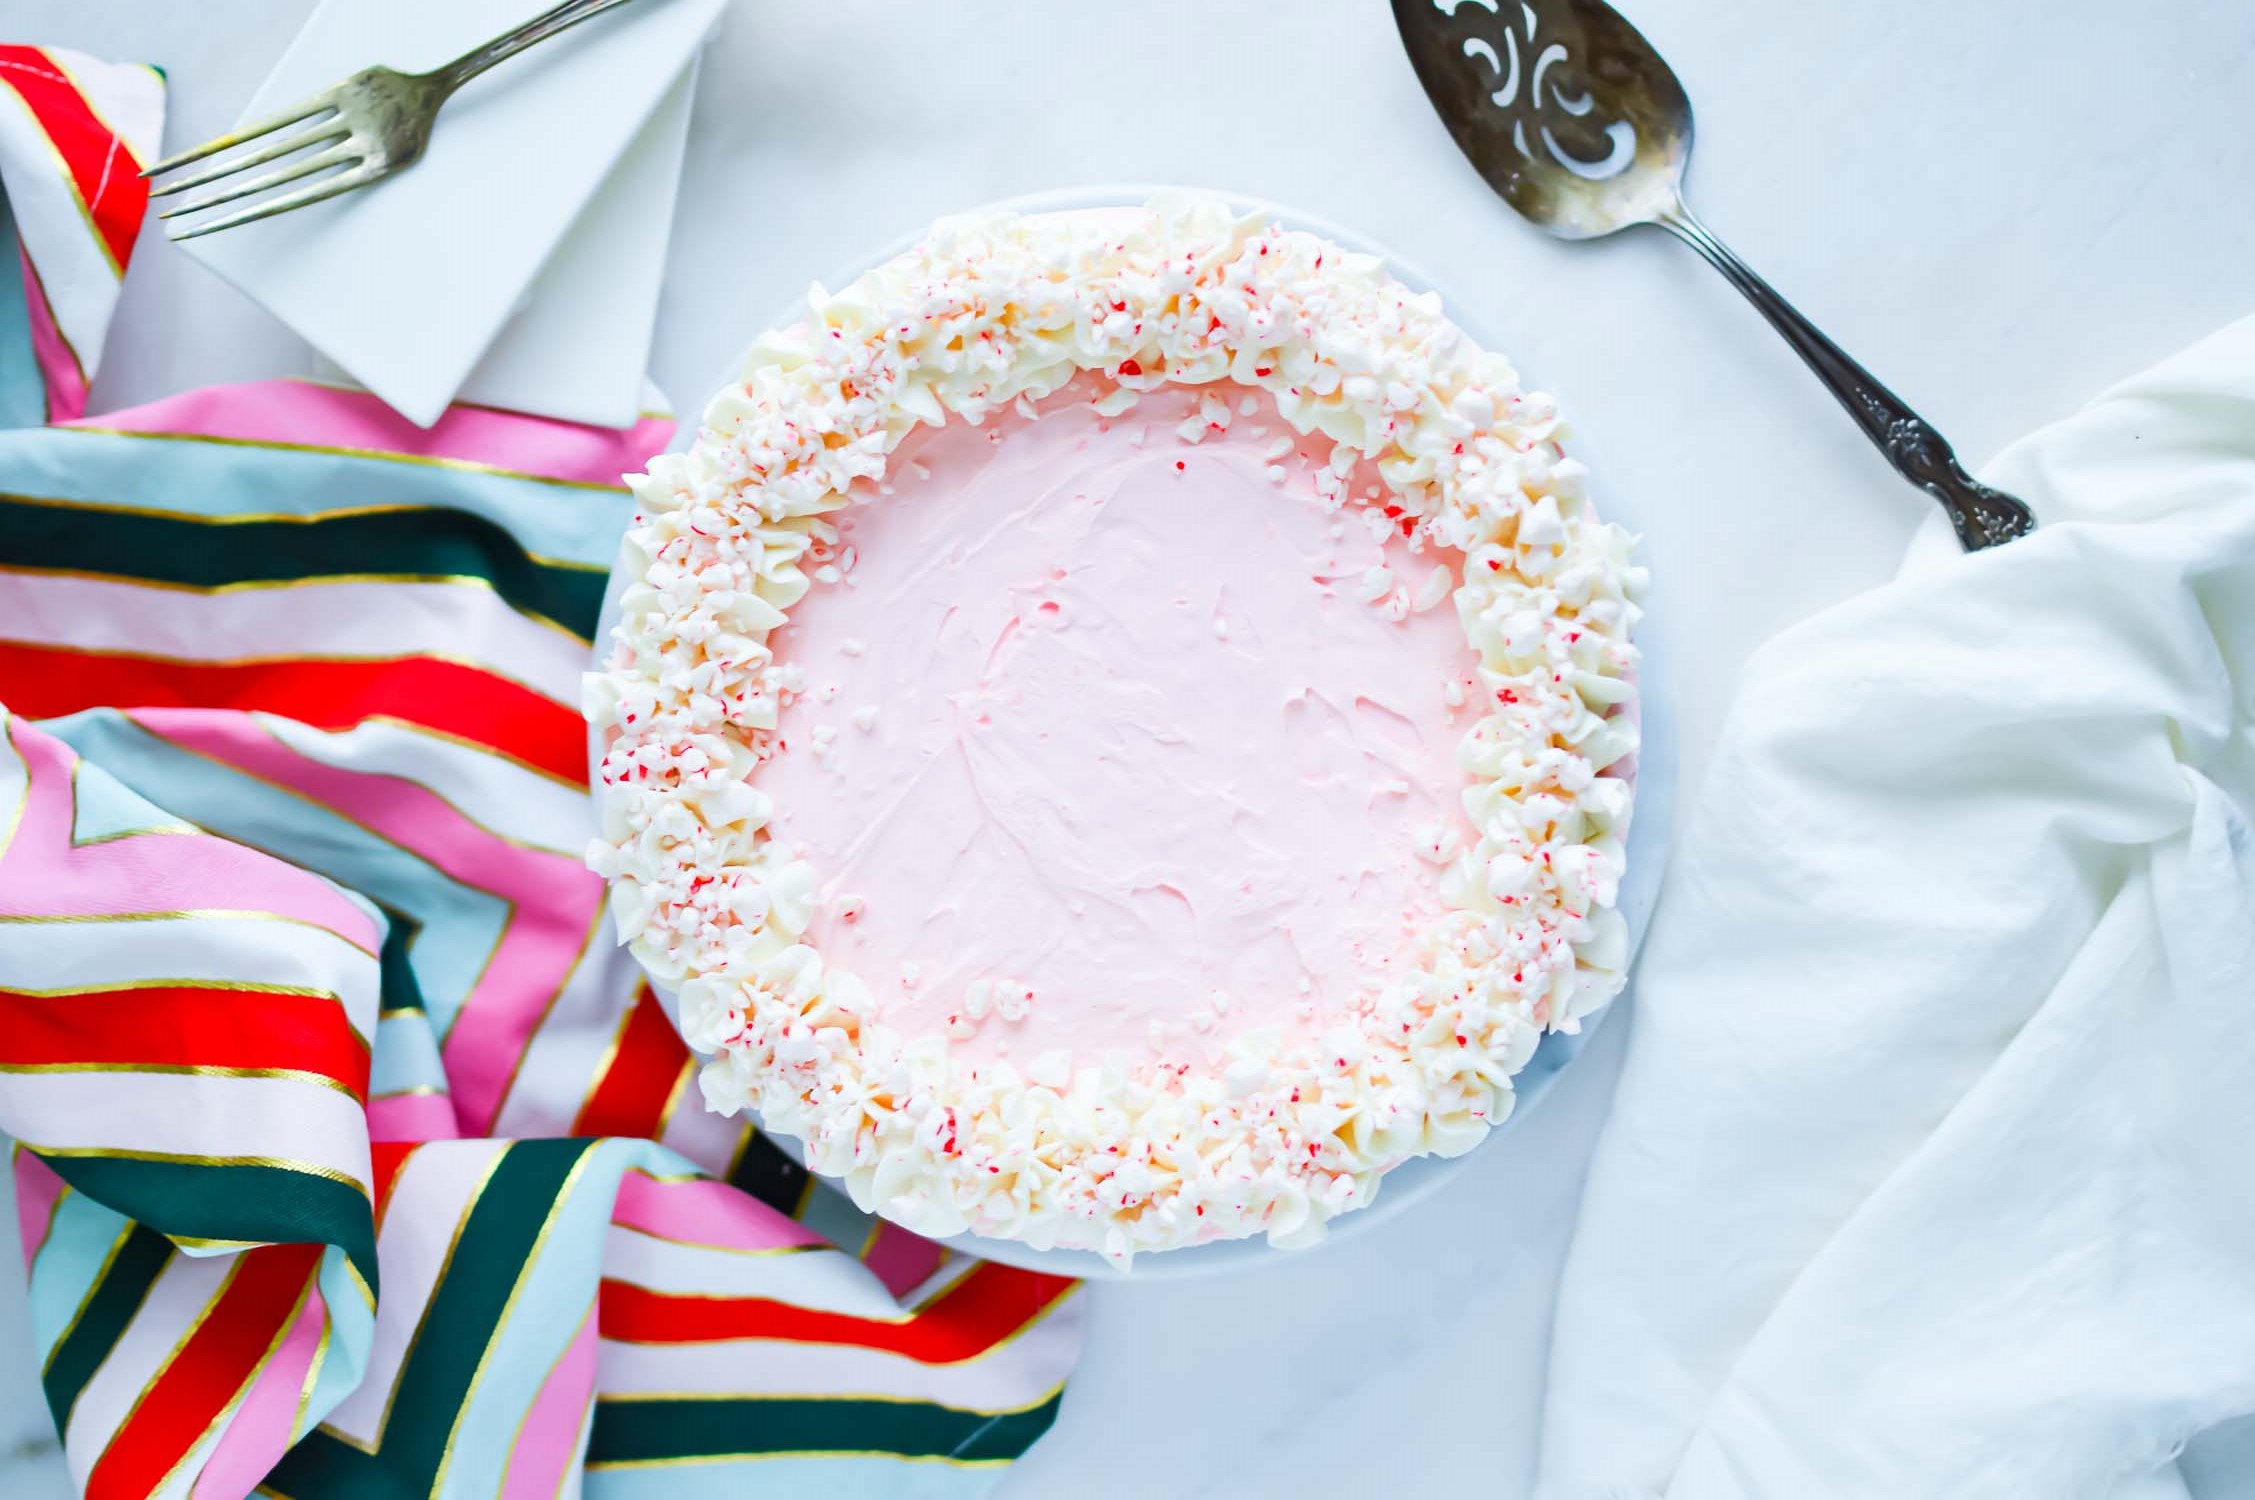 A whole peppermint pie with a colorful towel and a serving utensil.